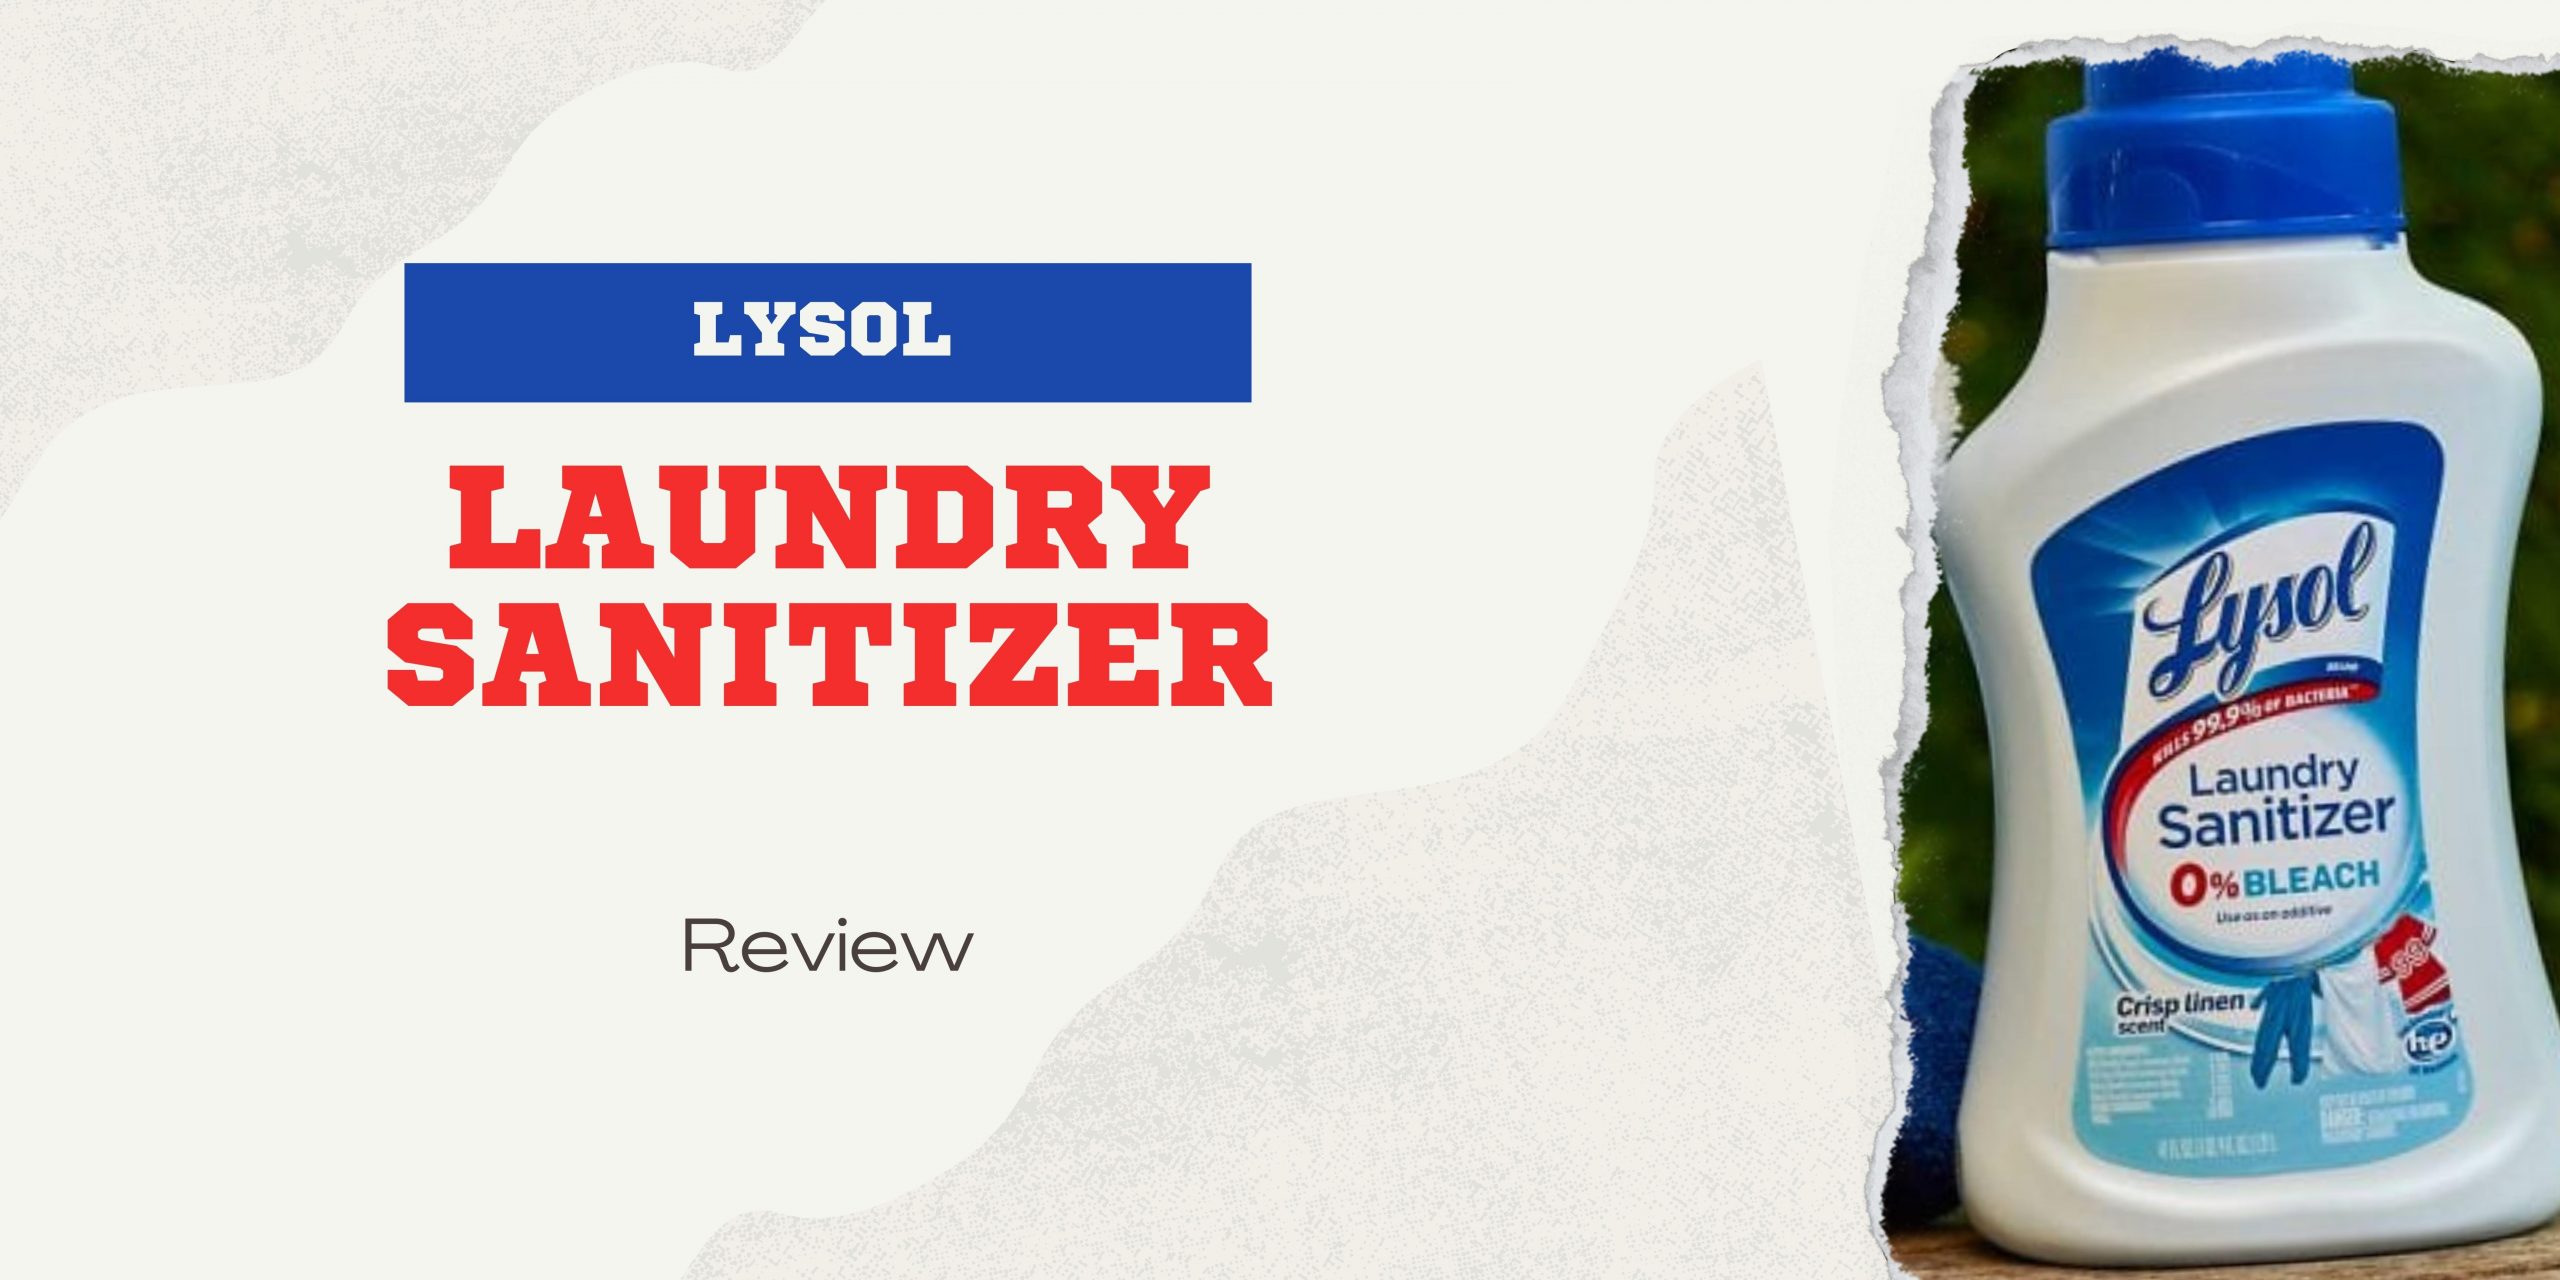 Lysol Laundry Sanitizer Review